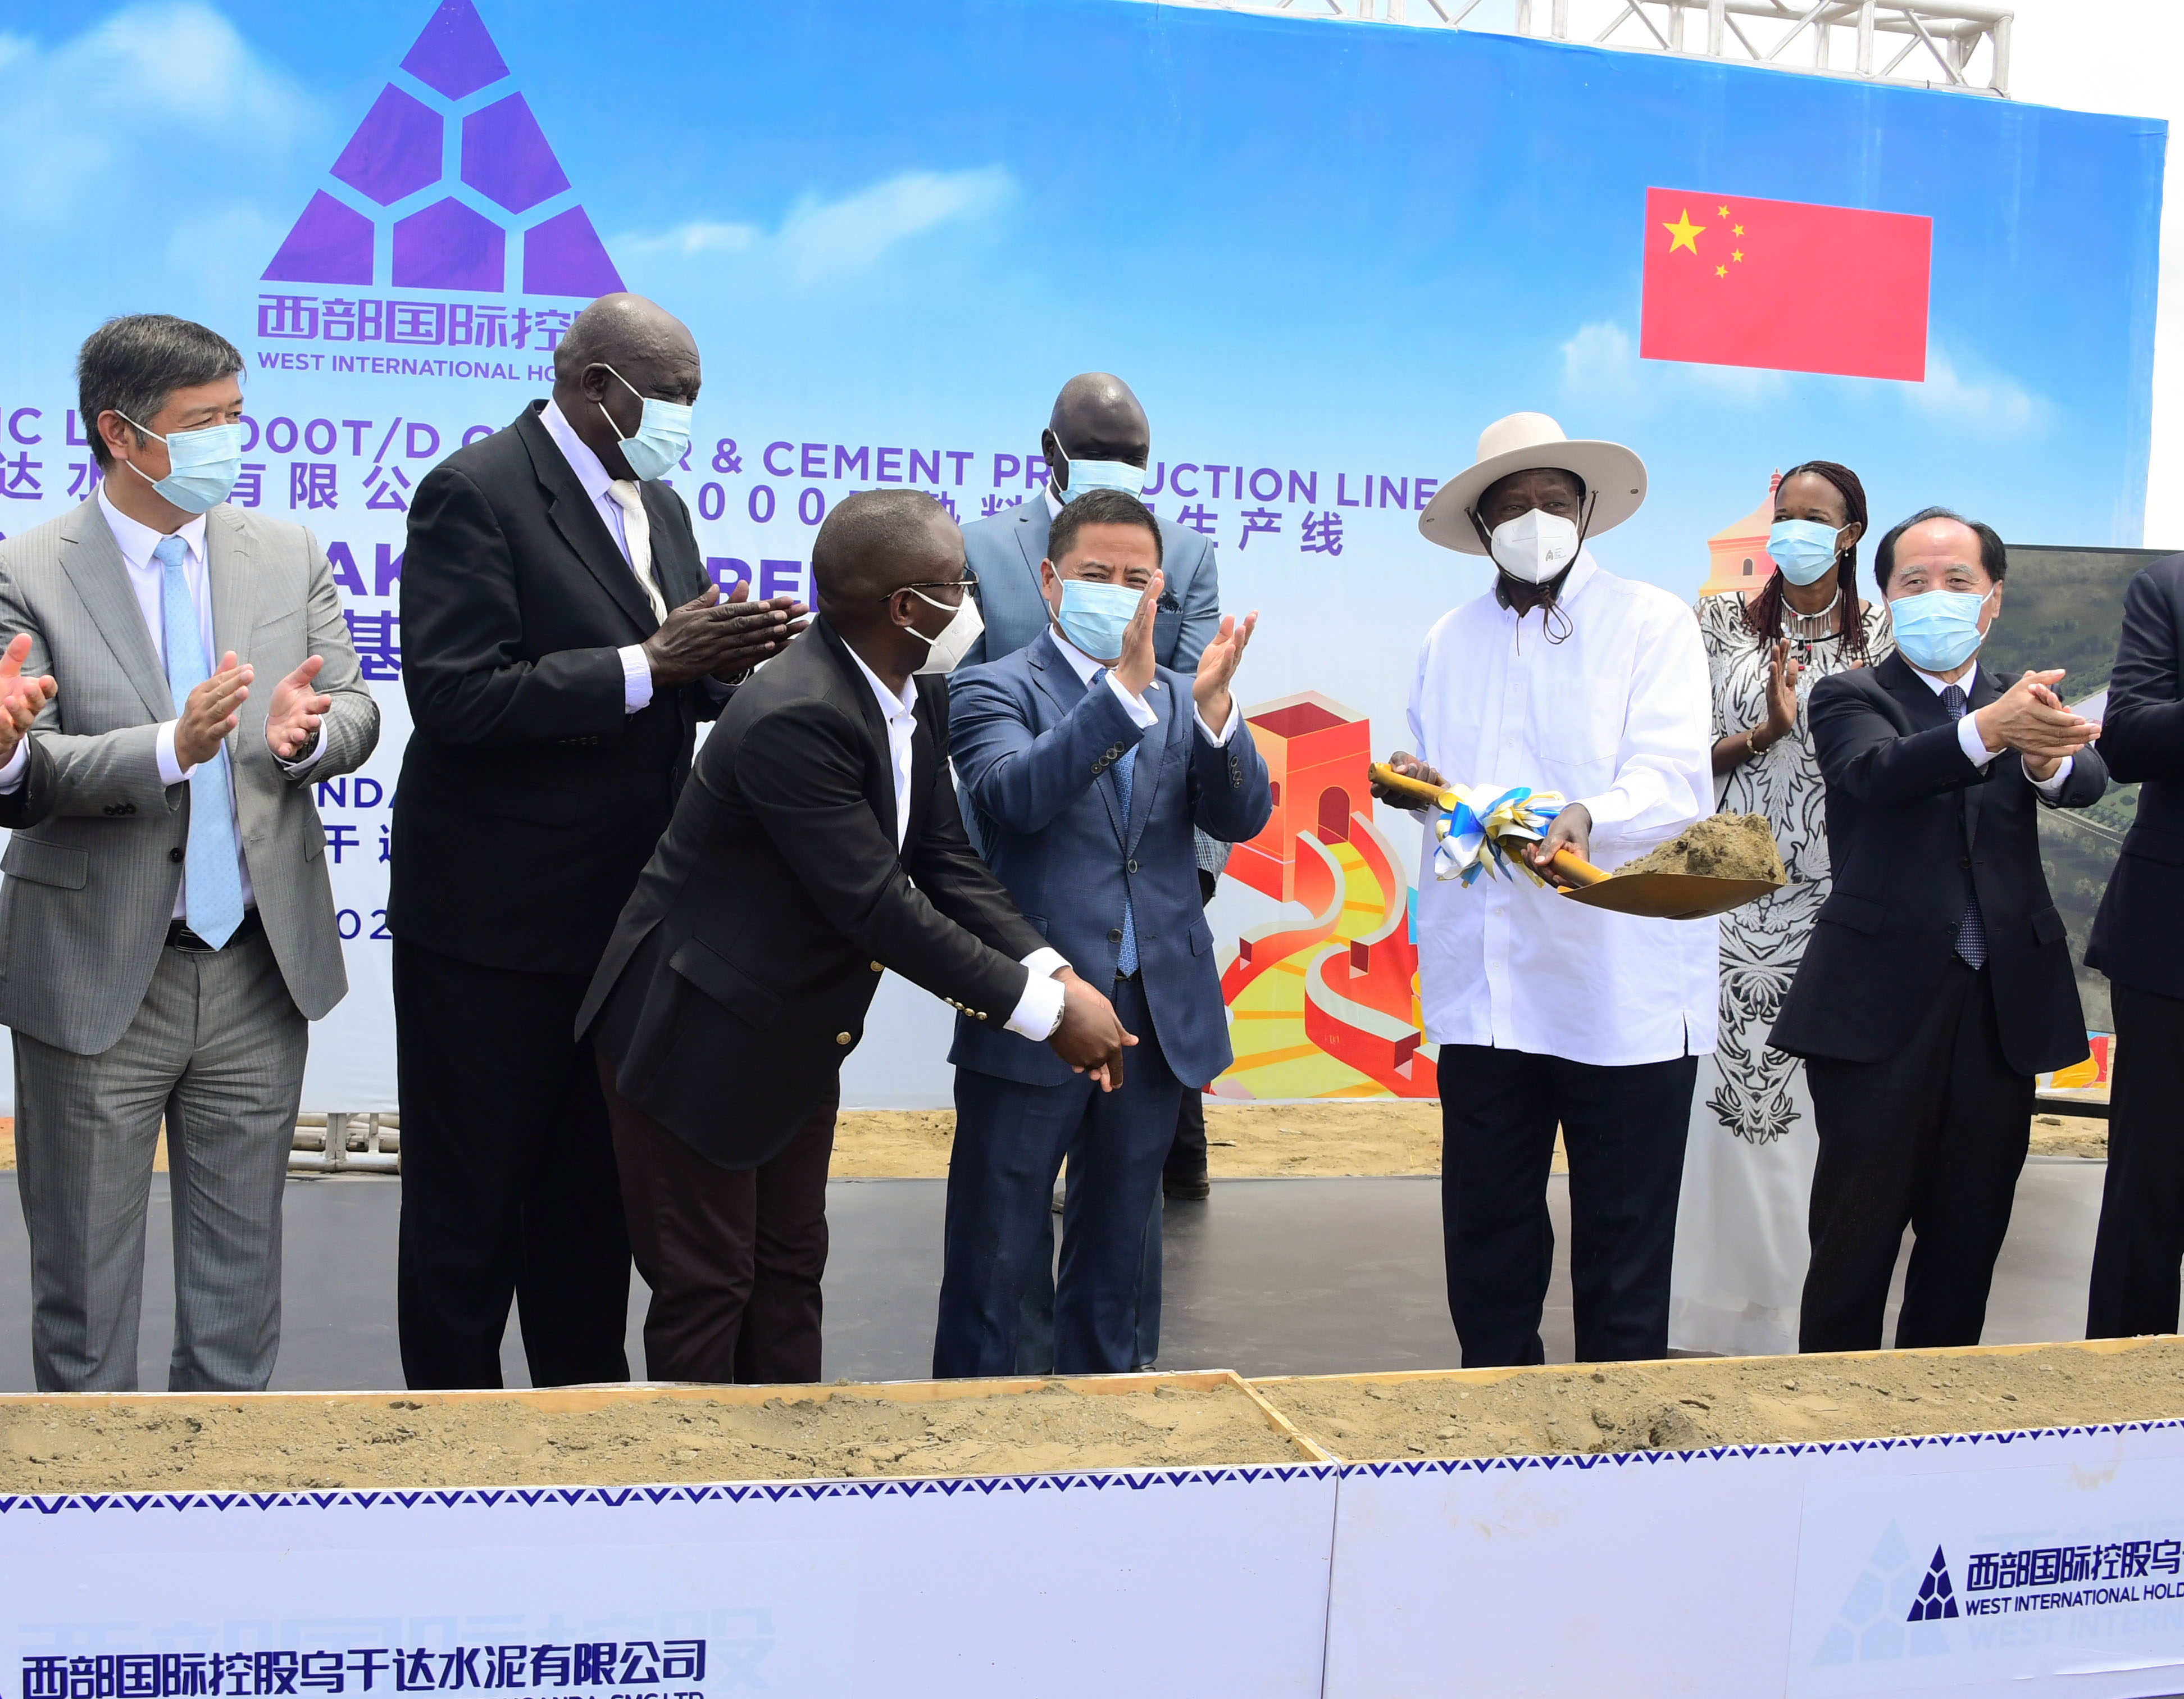 Museveni commissions a cement factory in Moroto